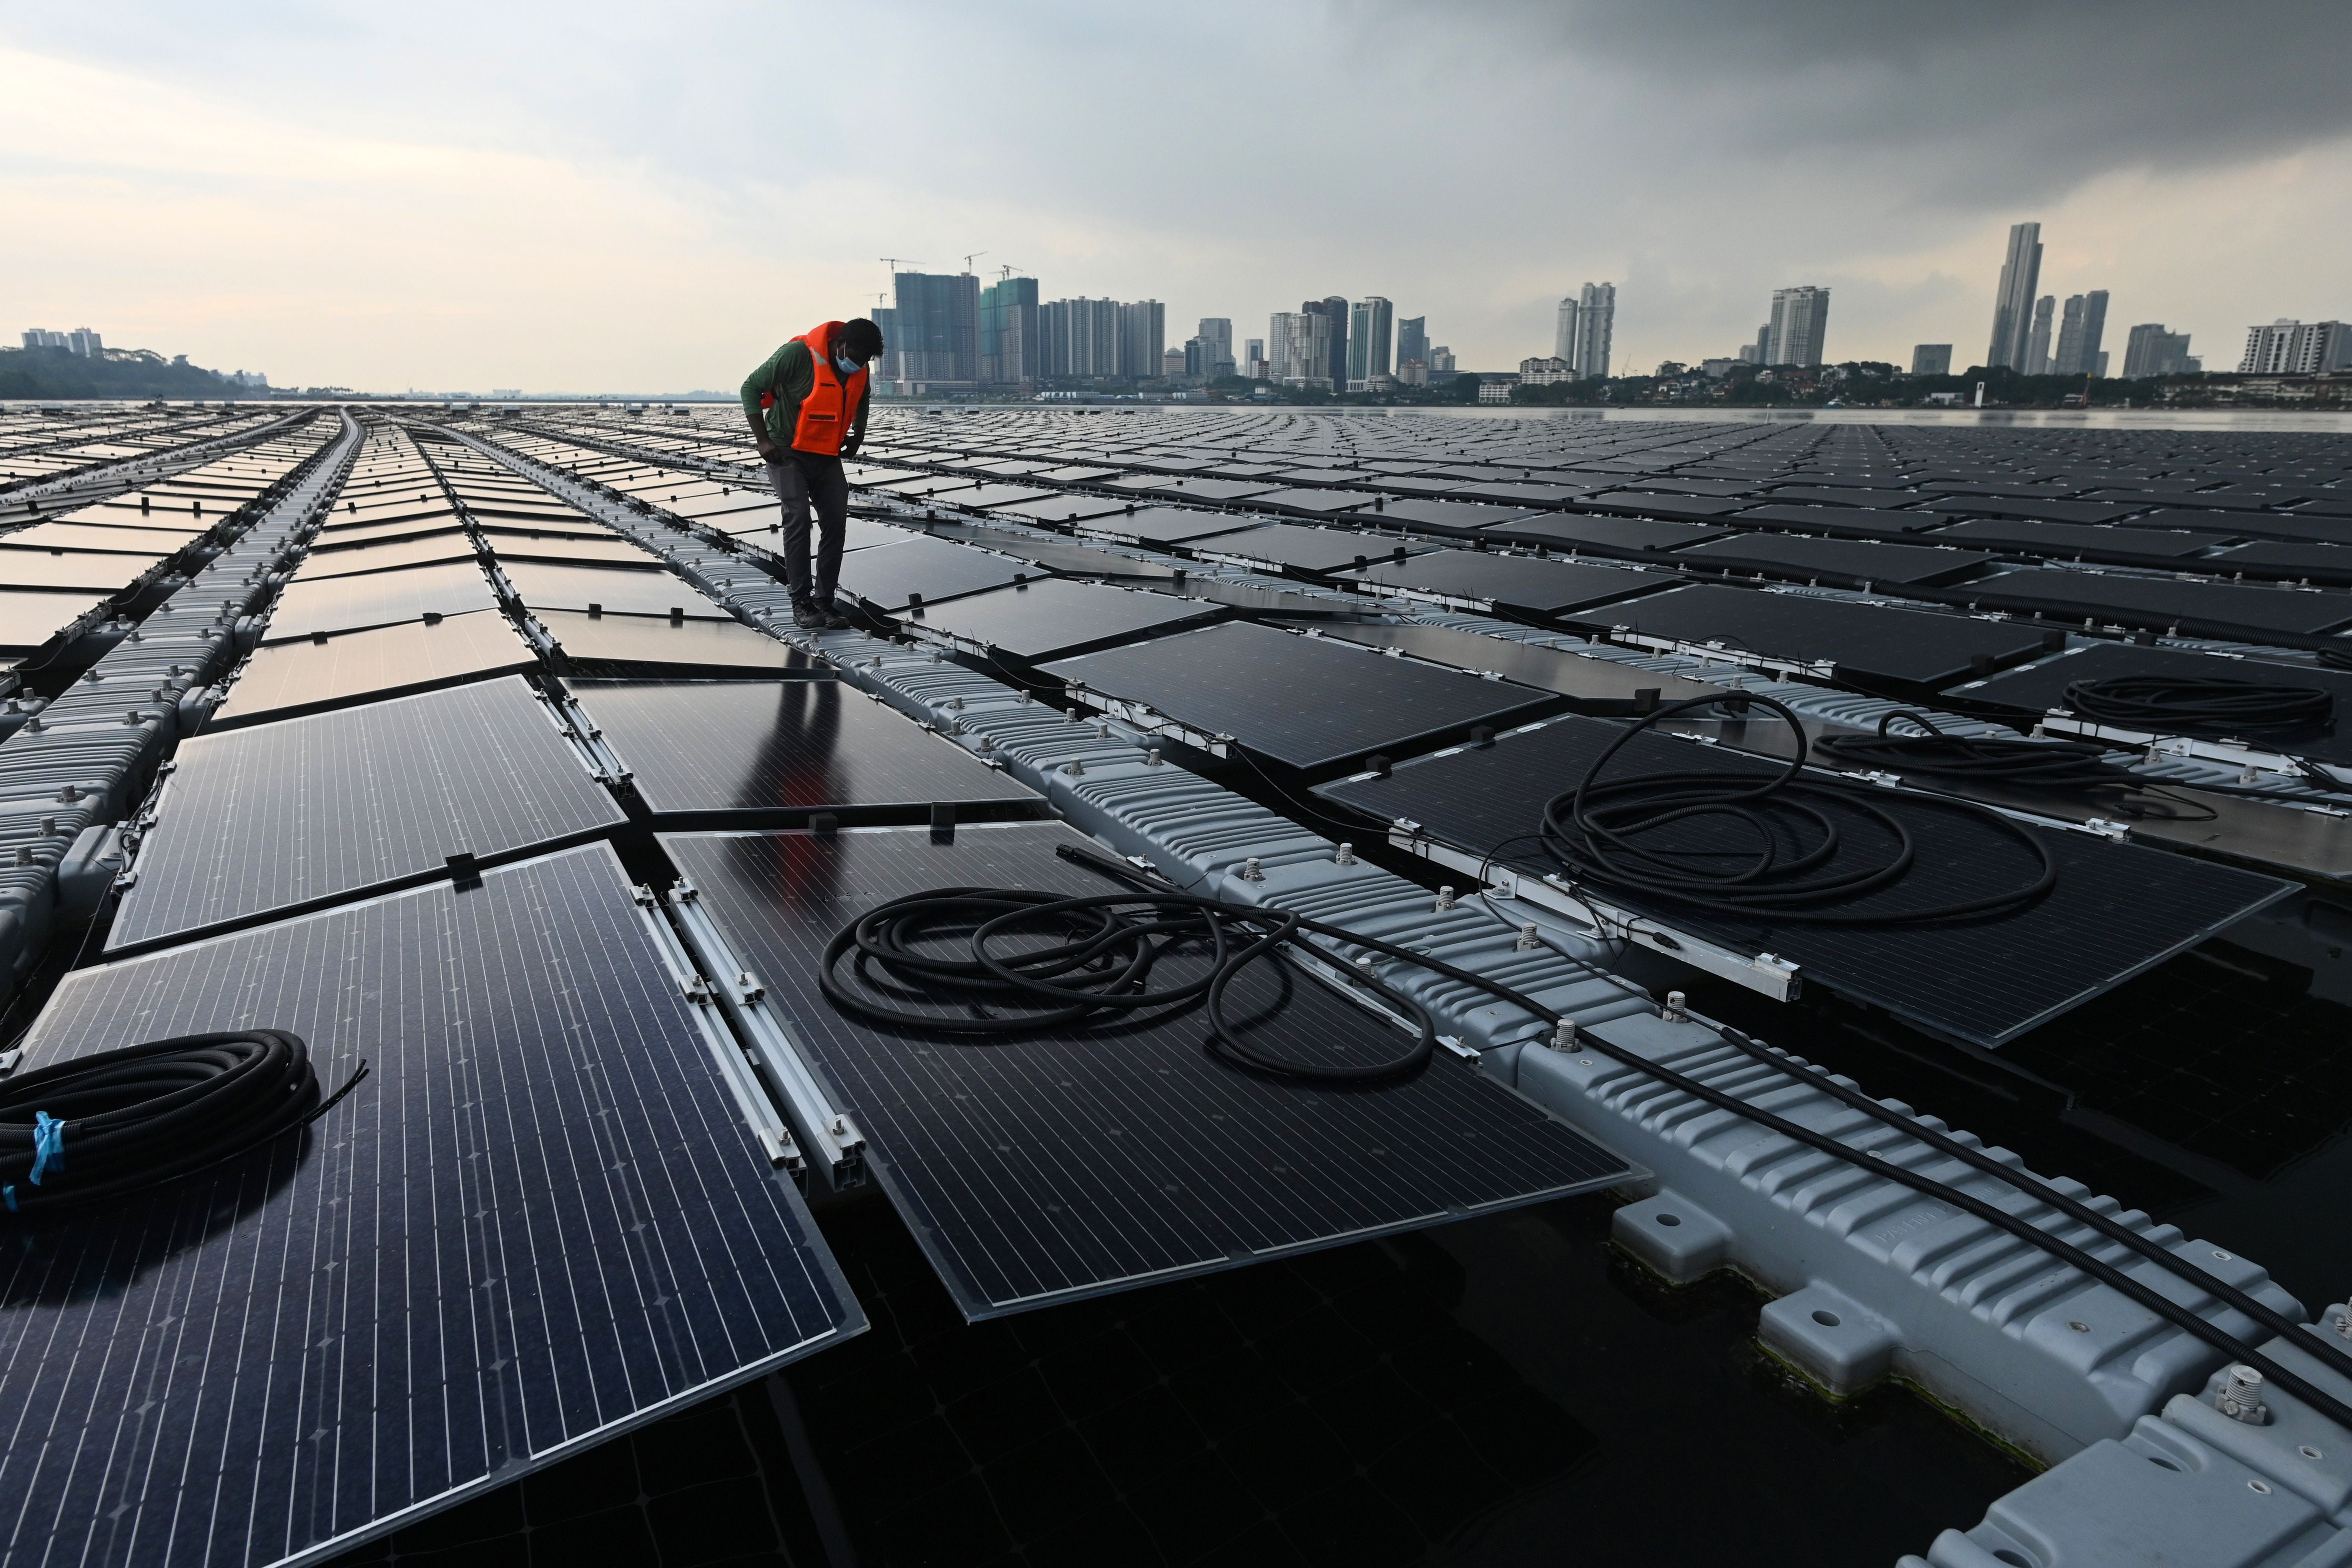 A worker checks cables on a floating solar power farm at sea off Singapore’s northern coast on 22 January, 2021.